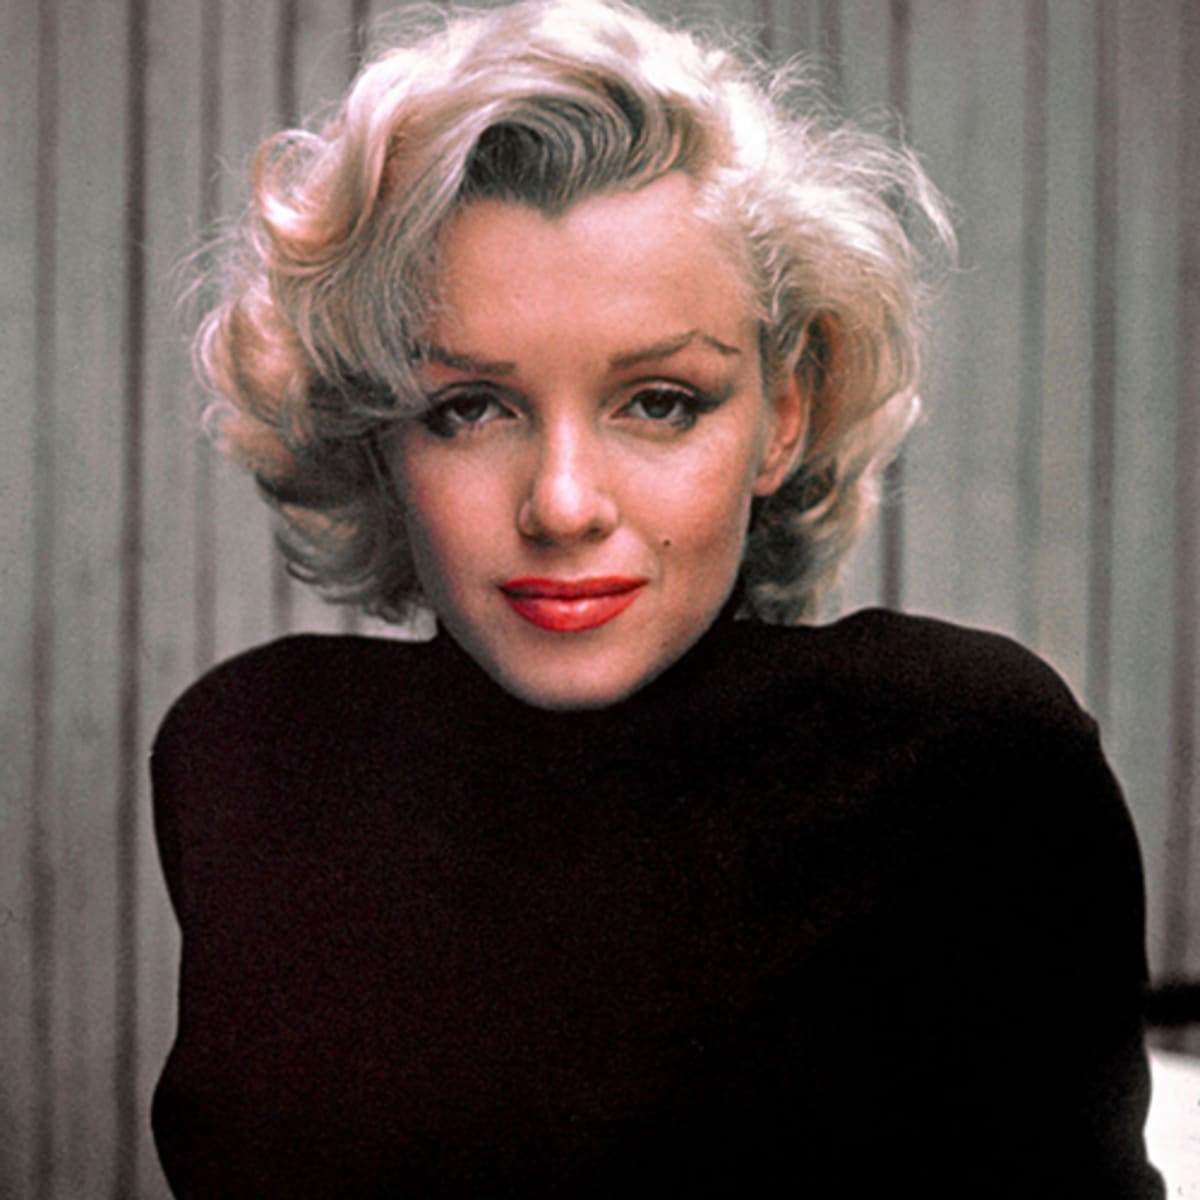 marilyn_monroe_photo_alfred_eisenstaedt_pix_inc_the_life_picture_collection_getty_images_53376357_cropped.jpg